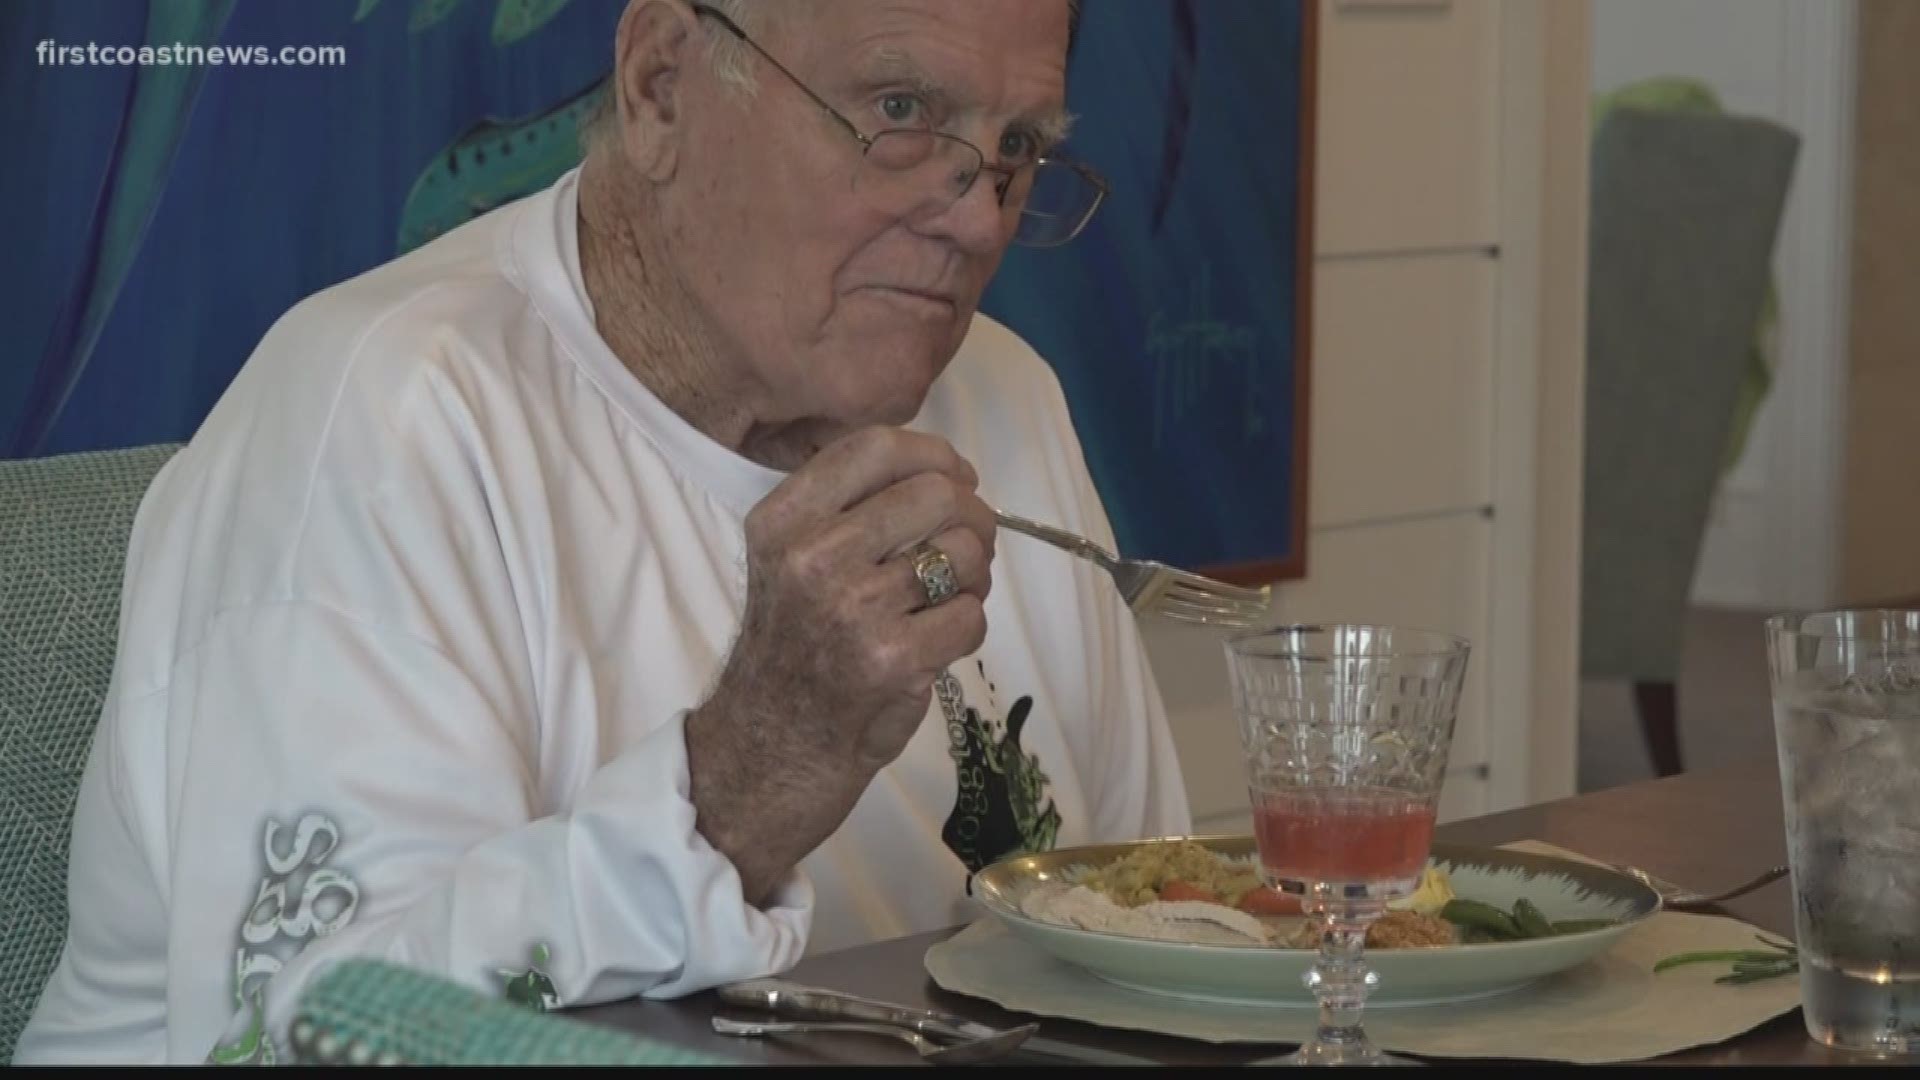 David Workman Sr. passed his swallowing test Wednesday after being unable to eat on his own for months.